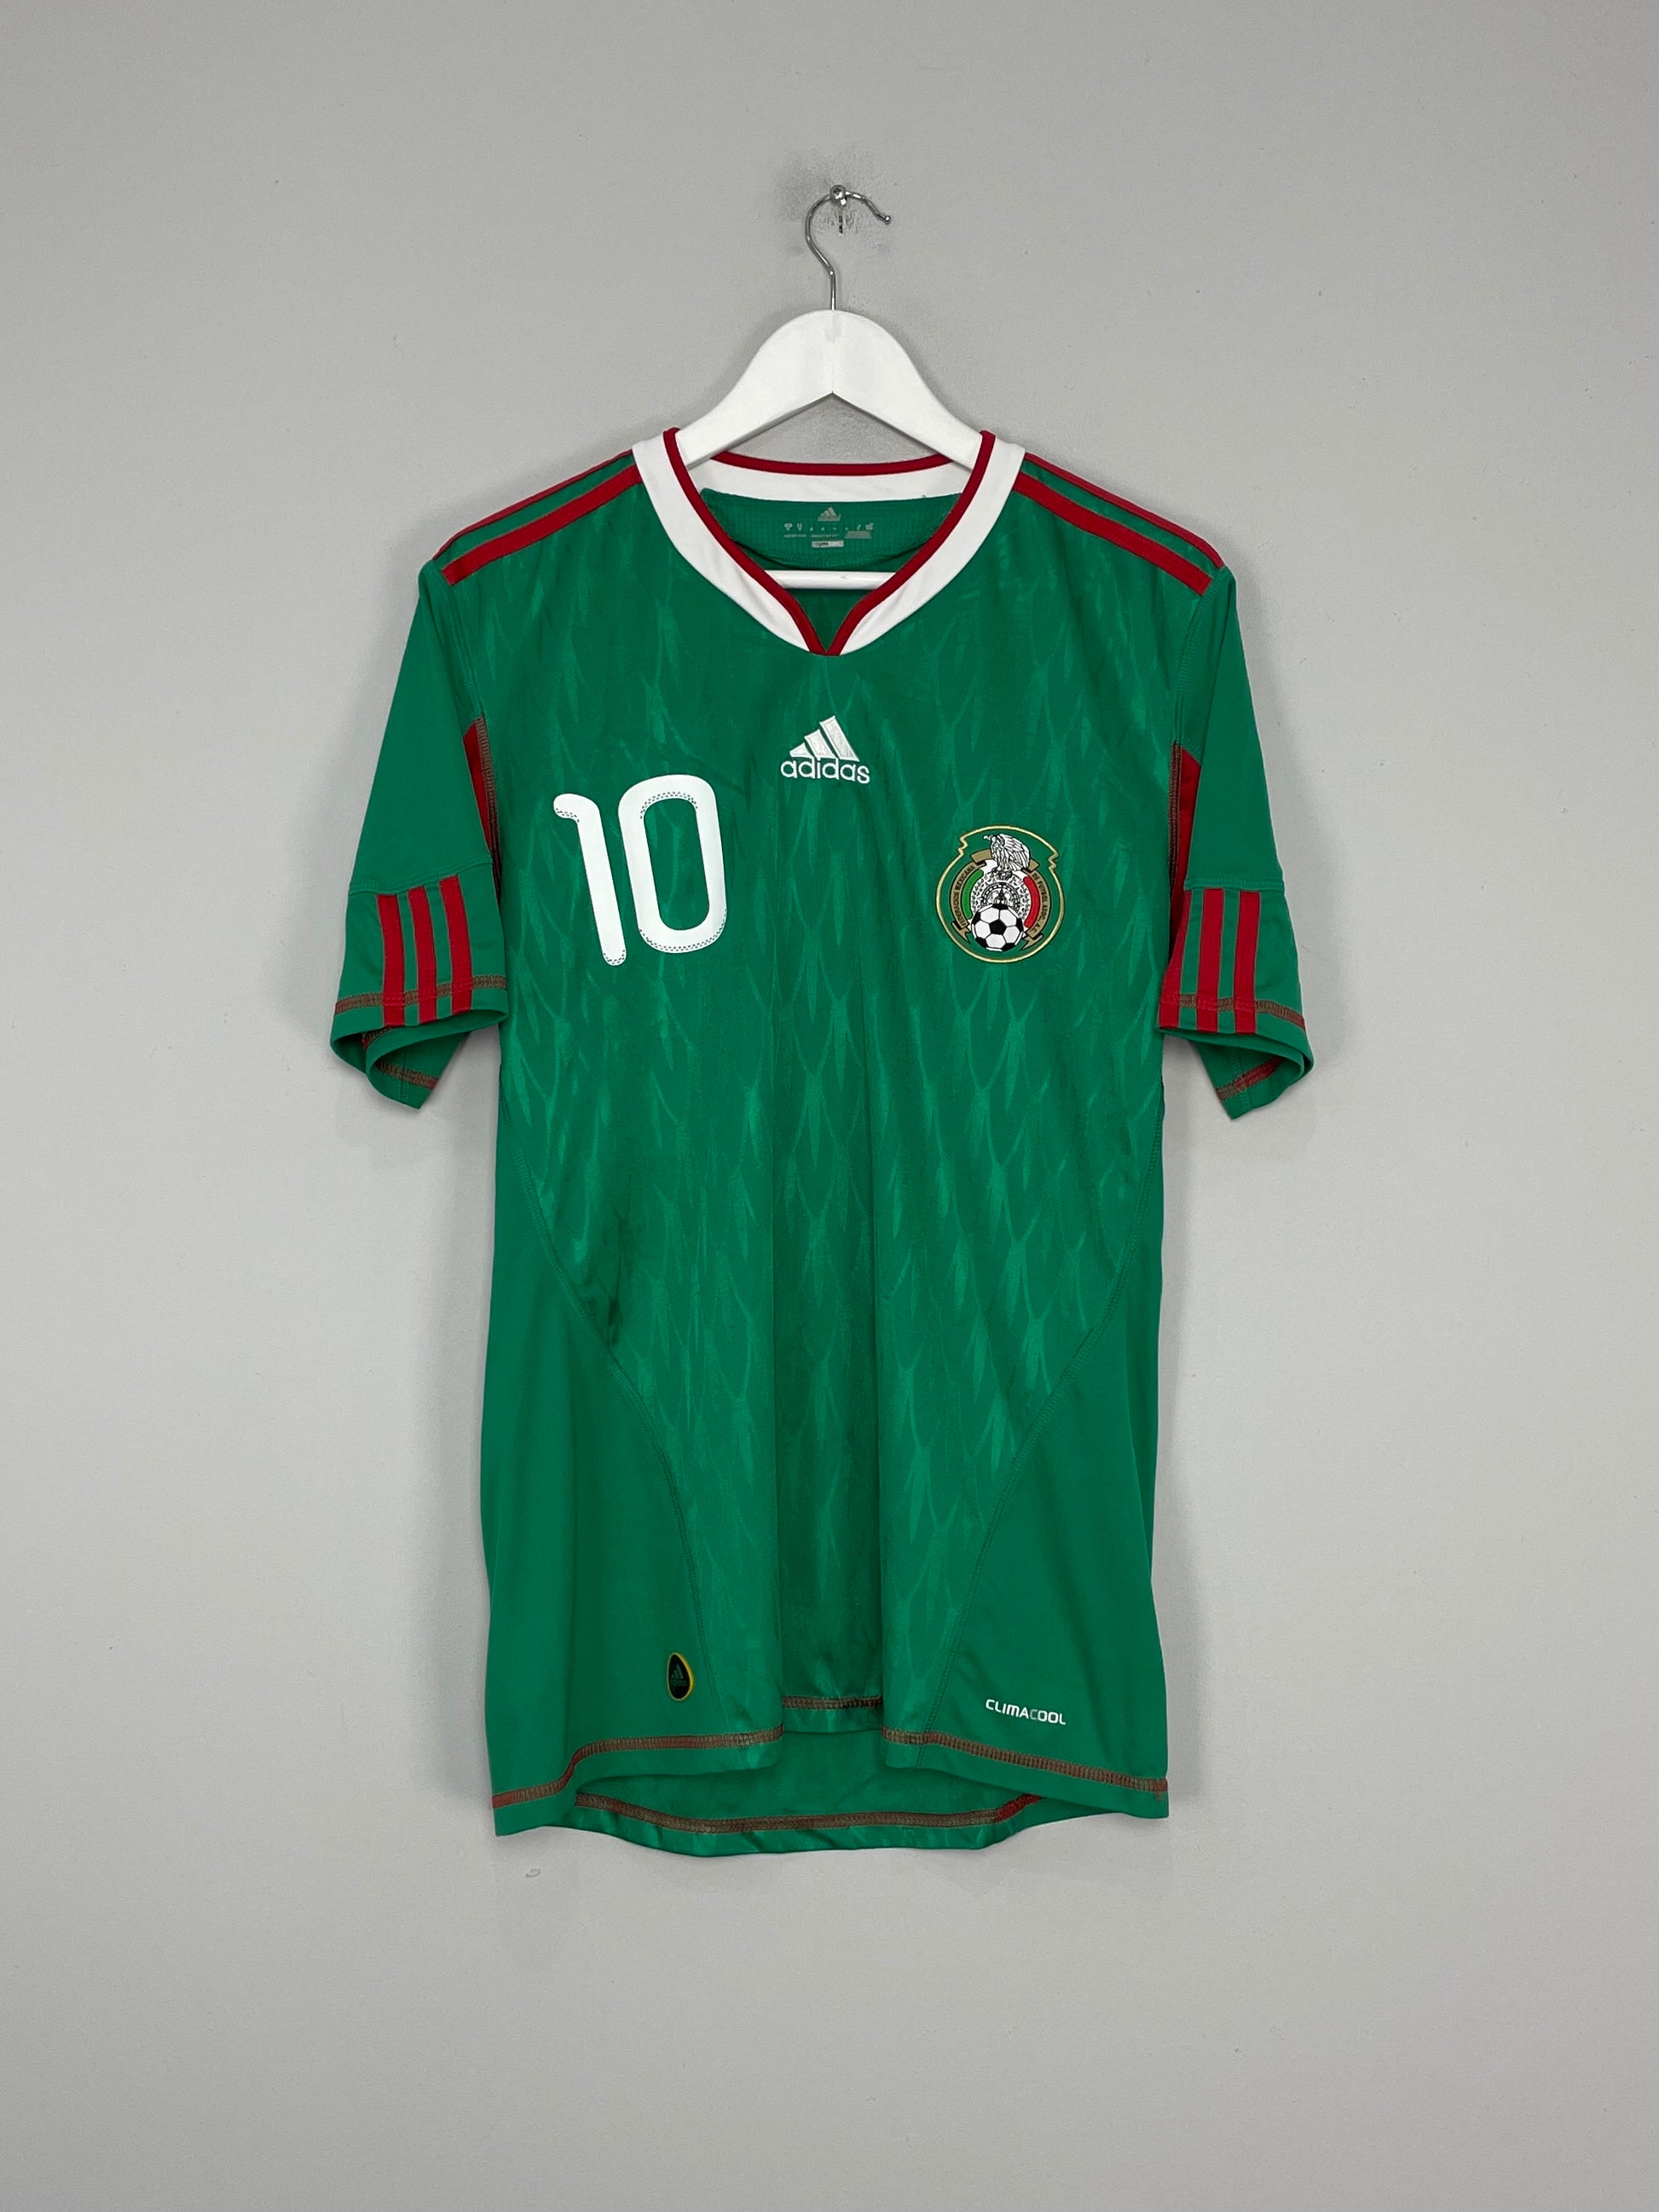 Mexico World Cup 2010 soccer jersey